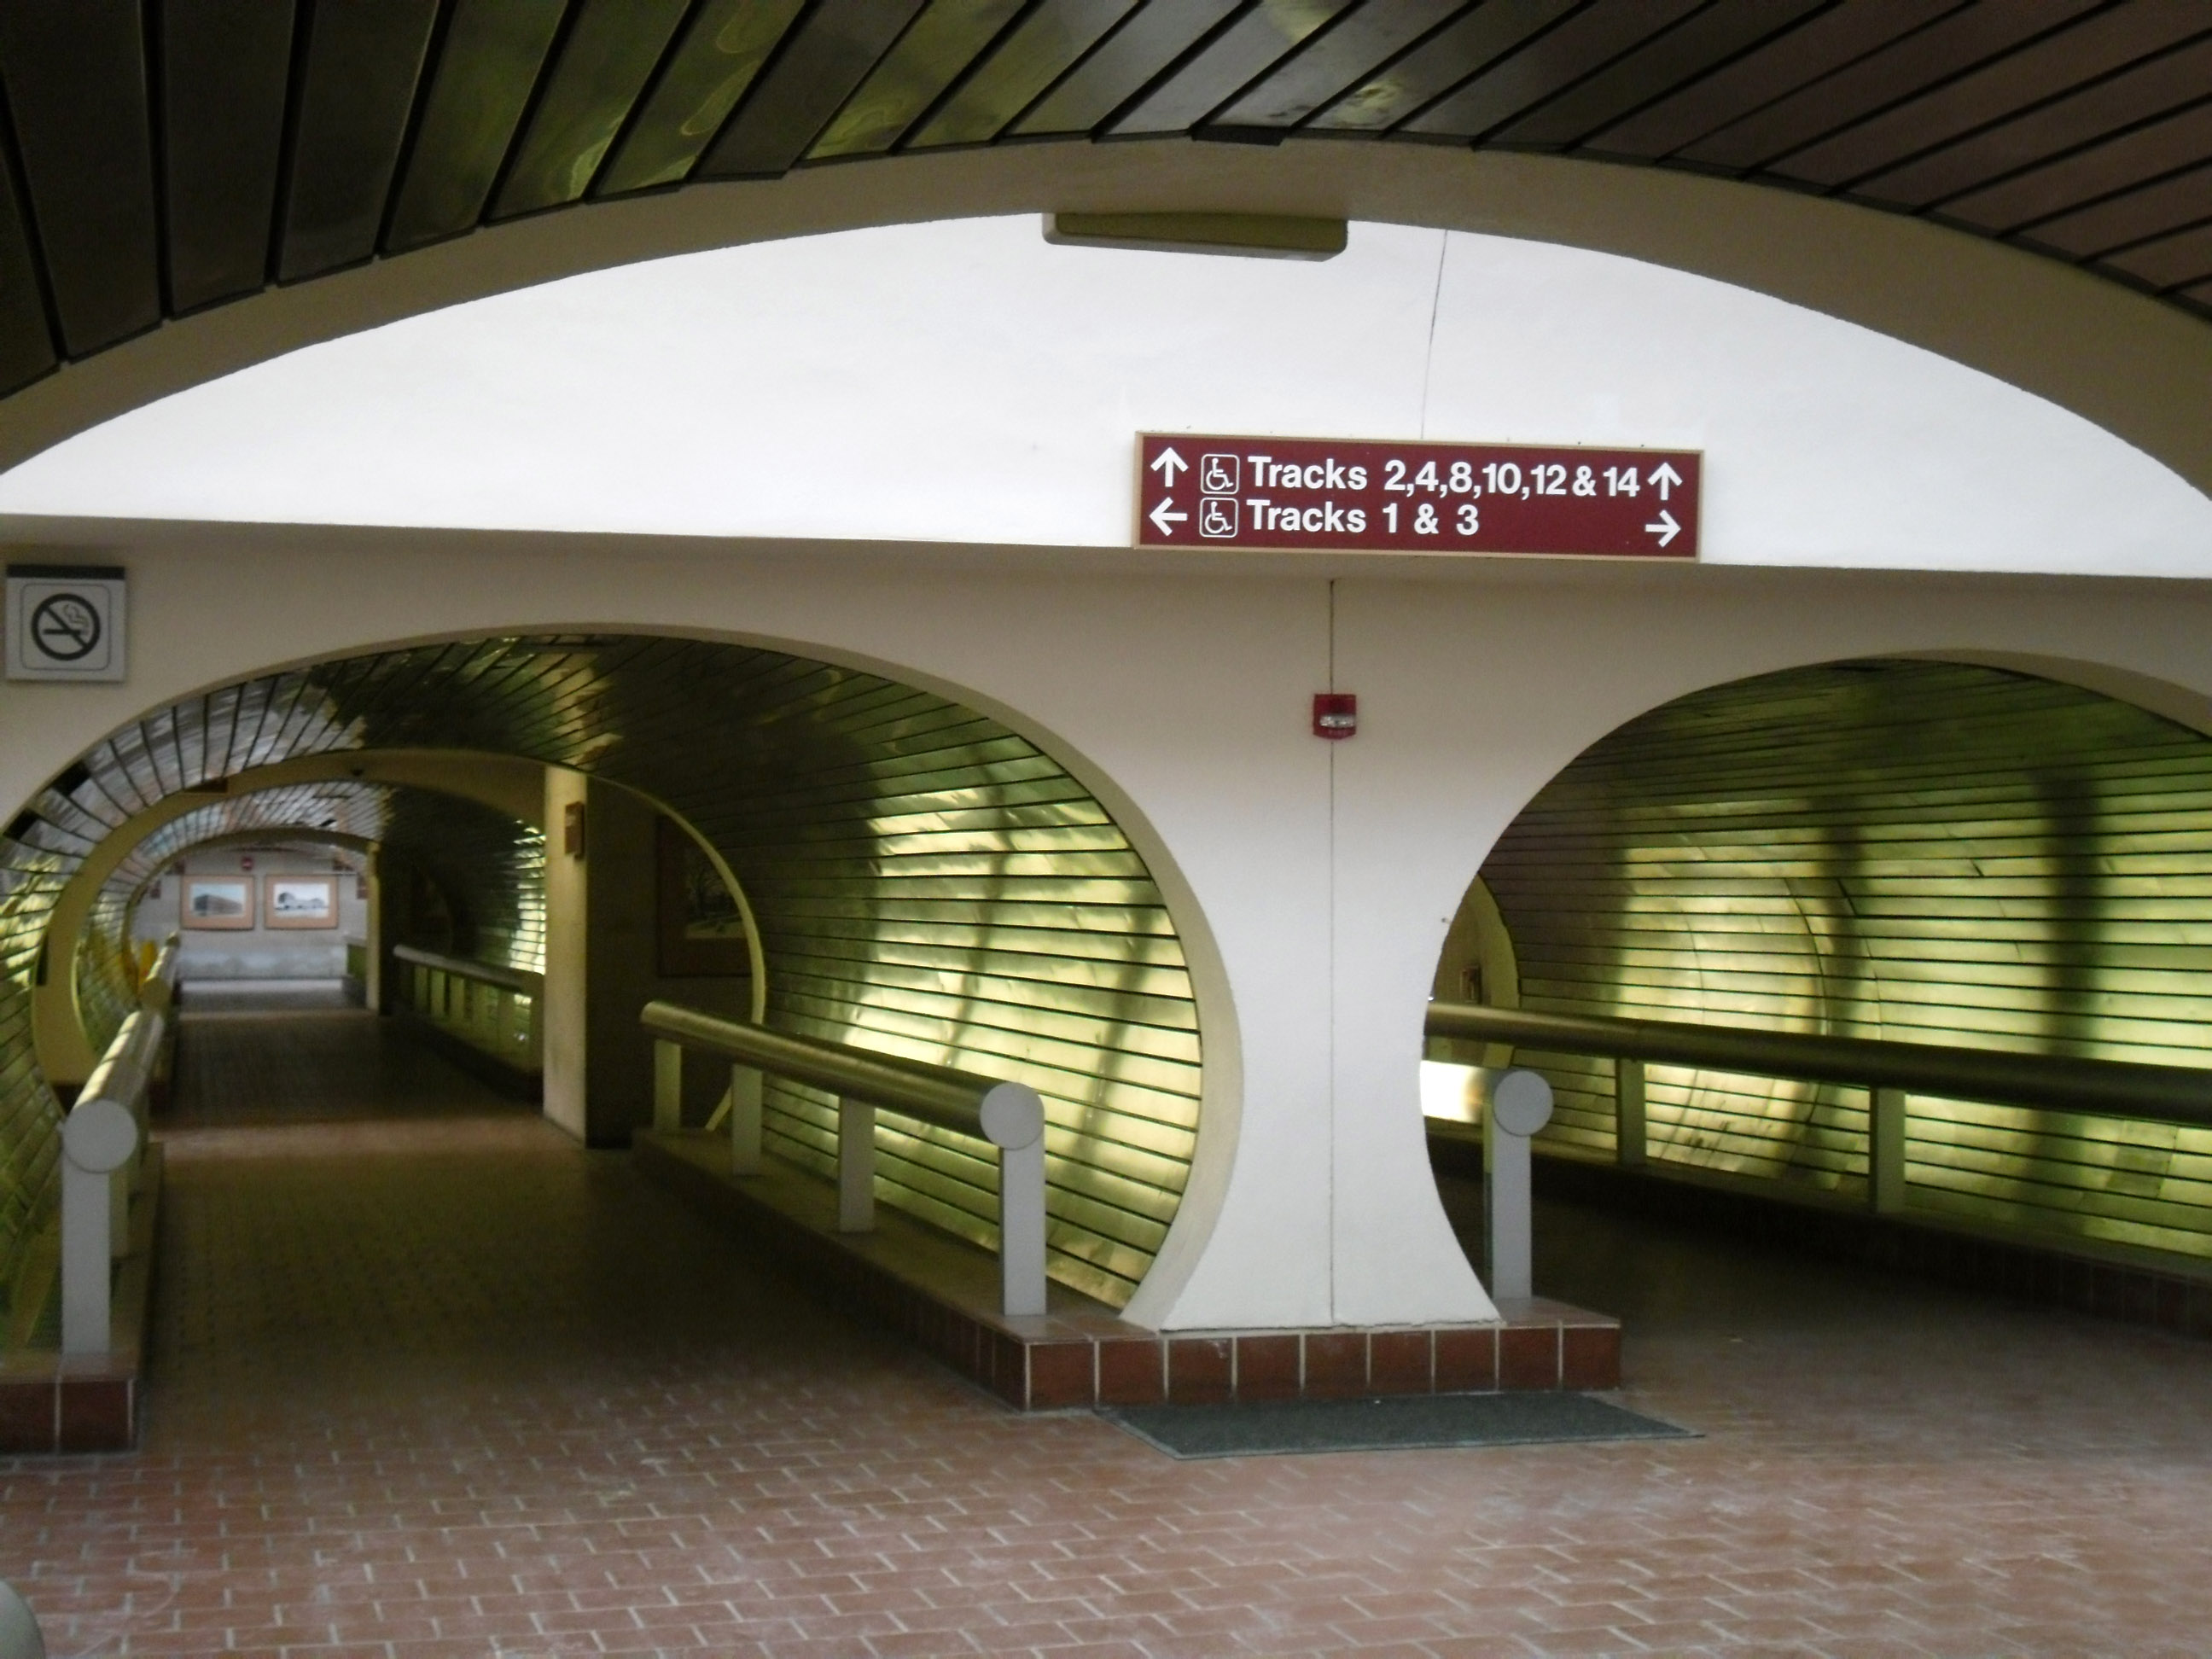 Union State Tunnel in New Haven, Connecticut image - Free stock photo ...